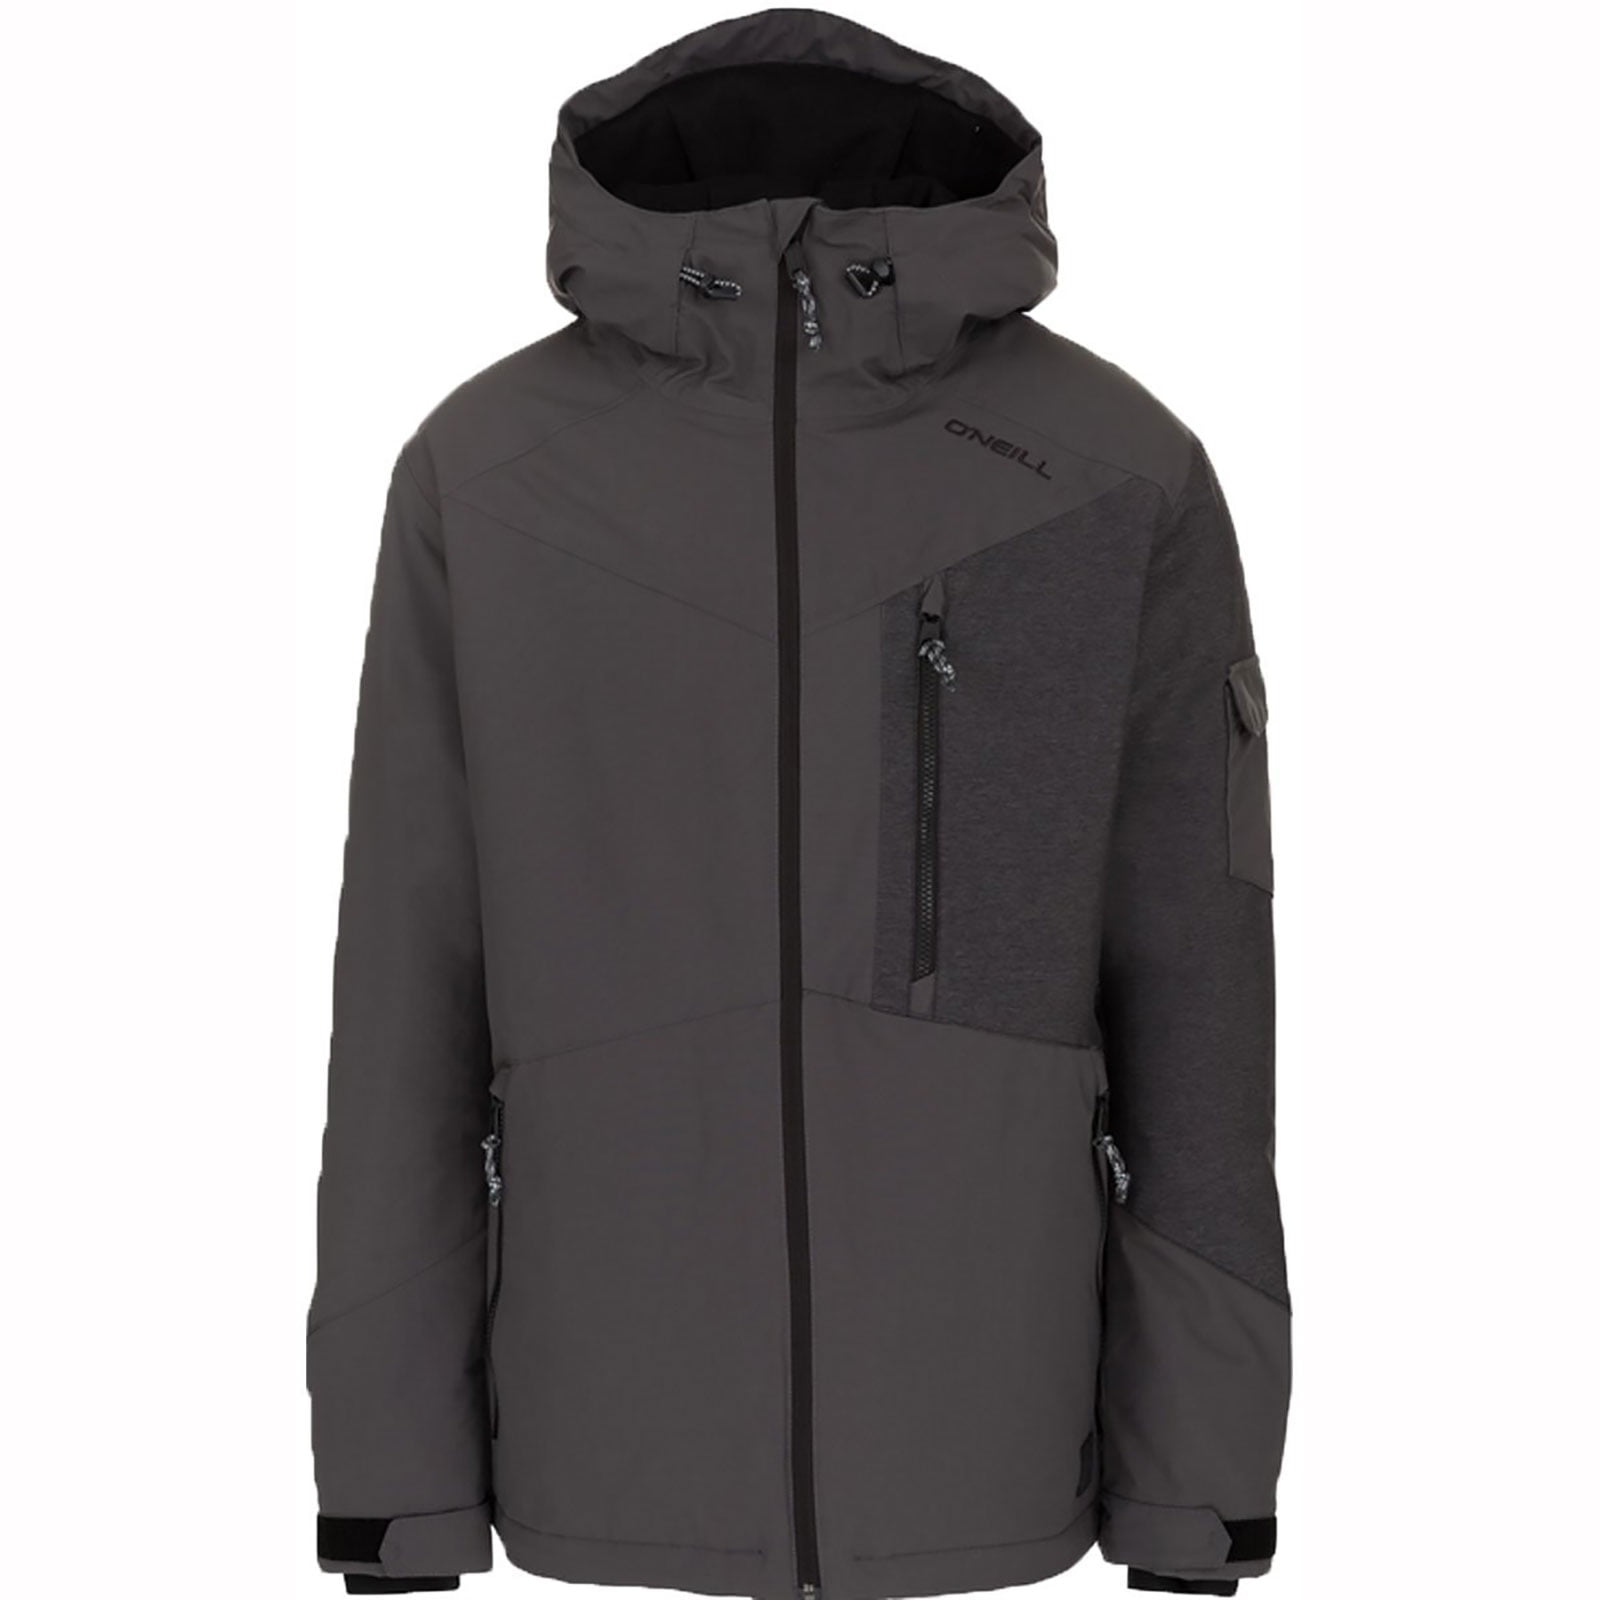 ONeill Cue Jacket 